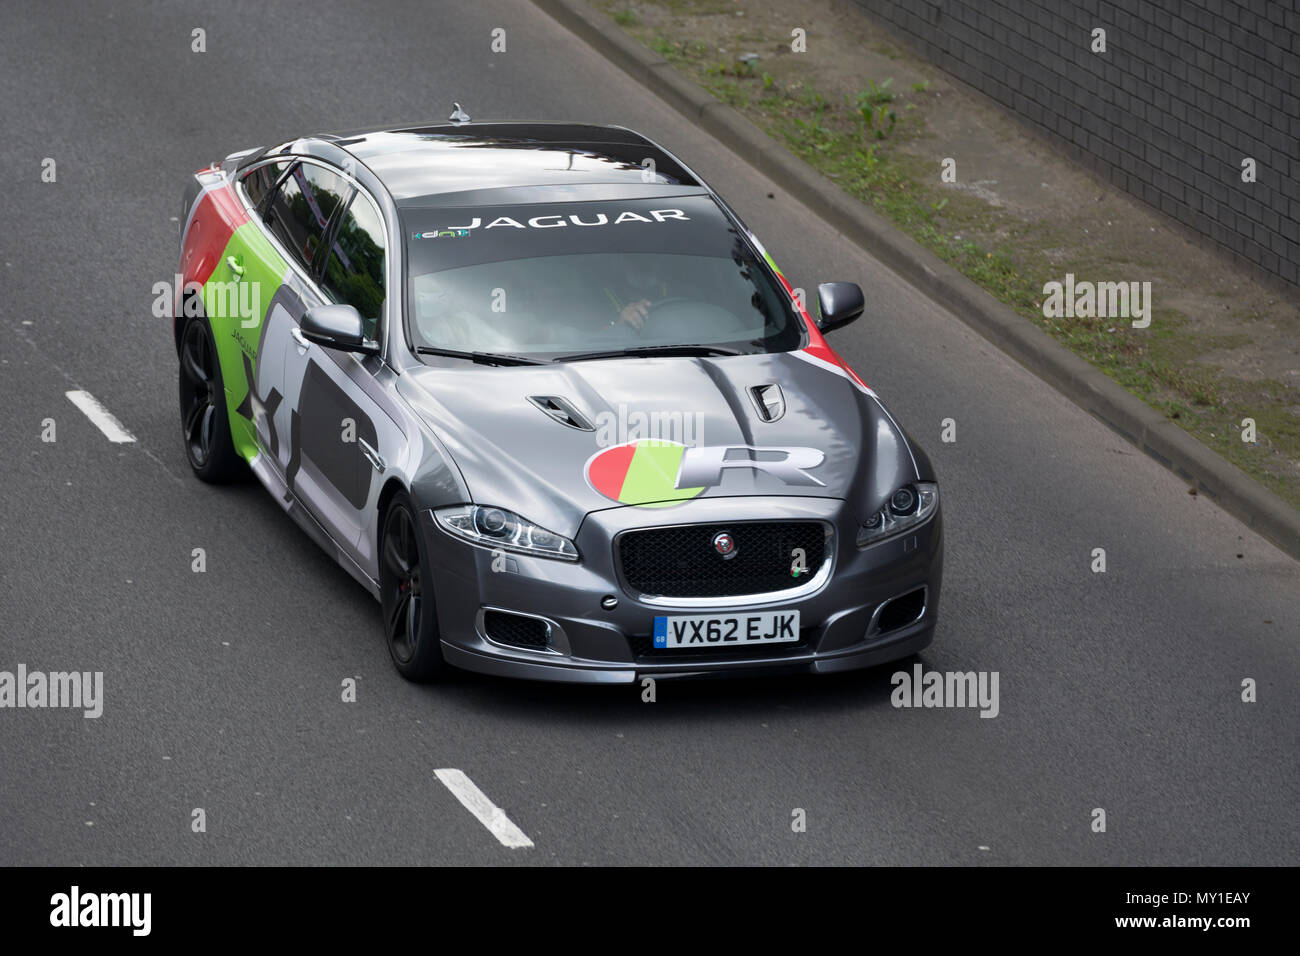 Jaguar XJ R-Sport  in a Performance Heritage Cars Speed Demonstration Lap on Coventry Ring Road. Stock Photo